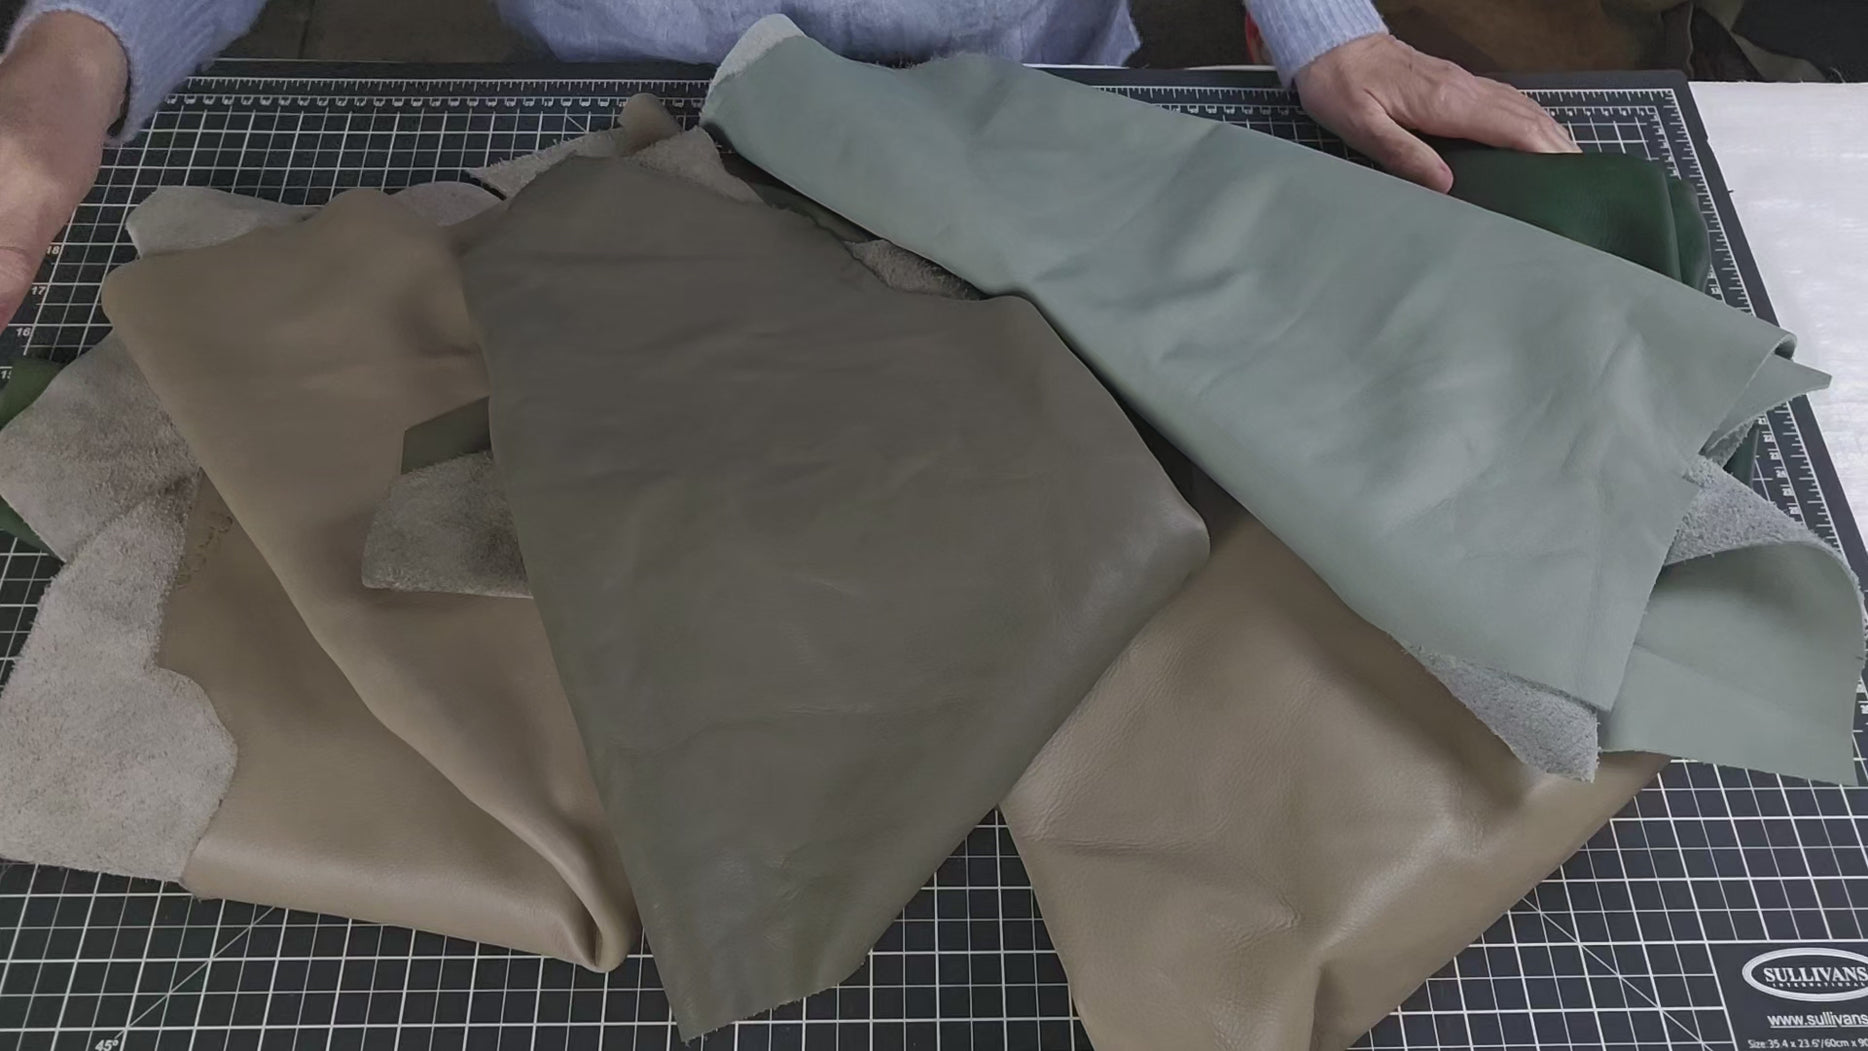 Green Leather Remnants for Crafts | Huge offcuts 3-5 sq. ft$44.00